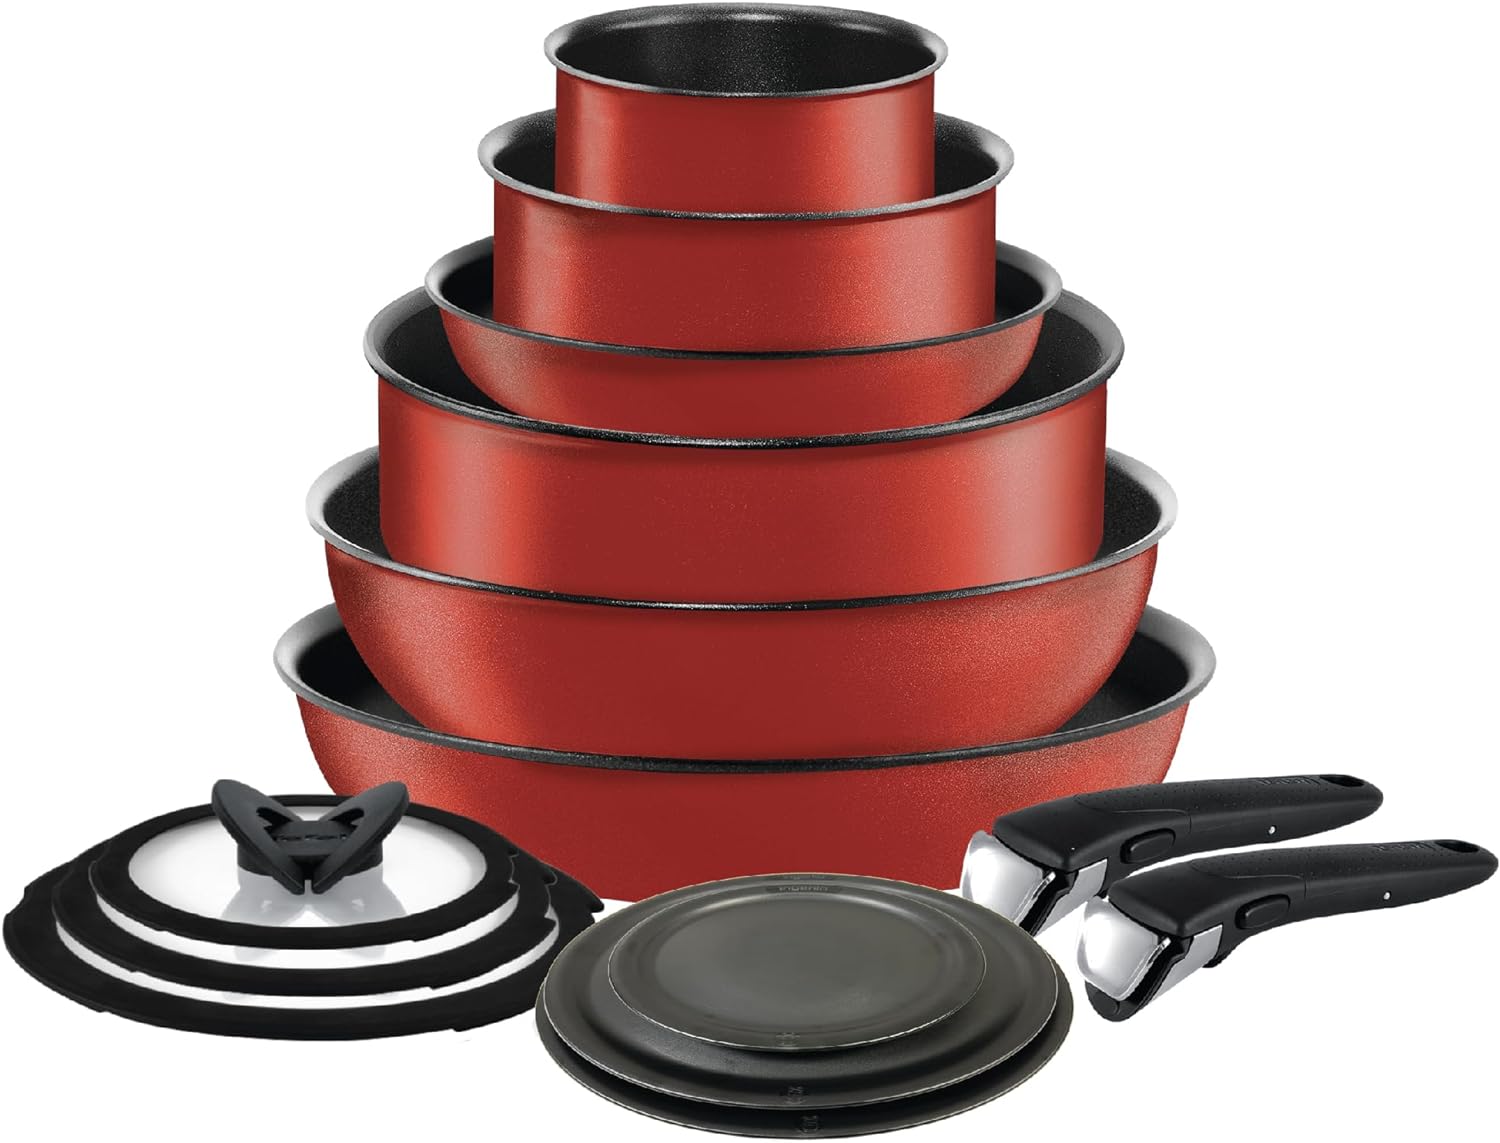 T-fal Ingenio Nonstick Cookware Set Review